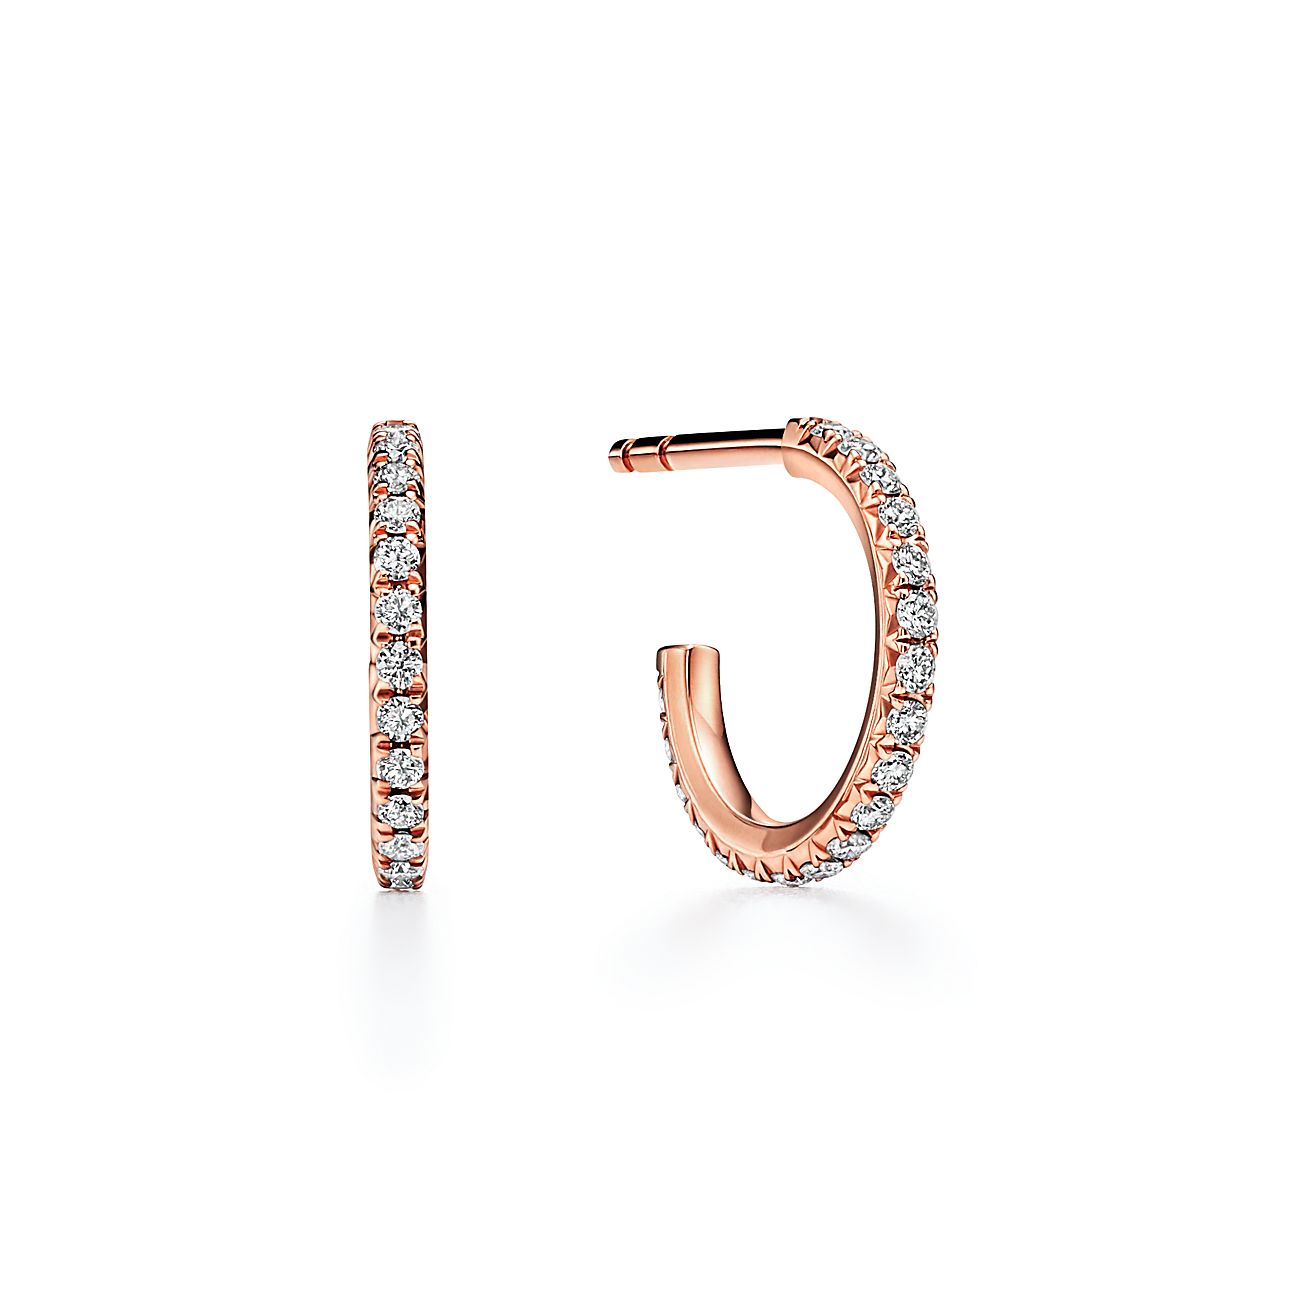 Tiffany Metro Hoop Earrings in Rose Gold with Diamonds, Small 